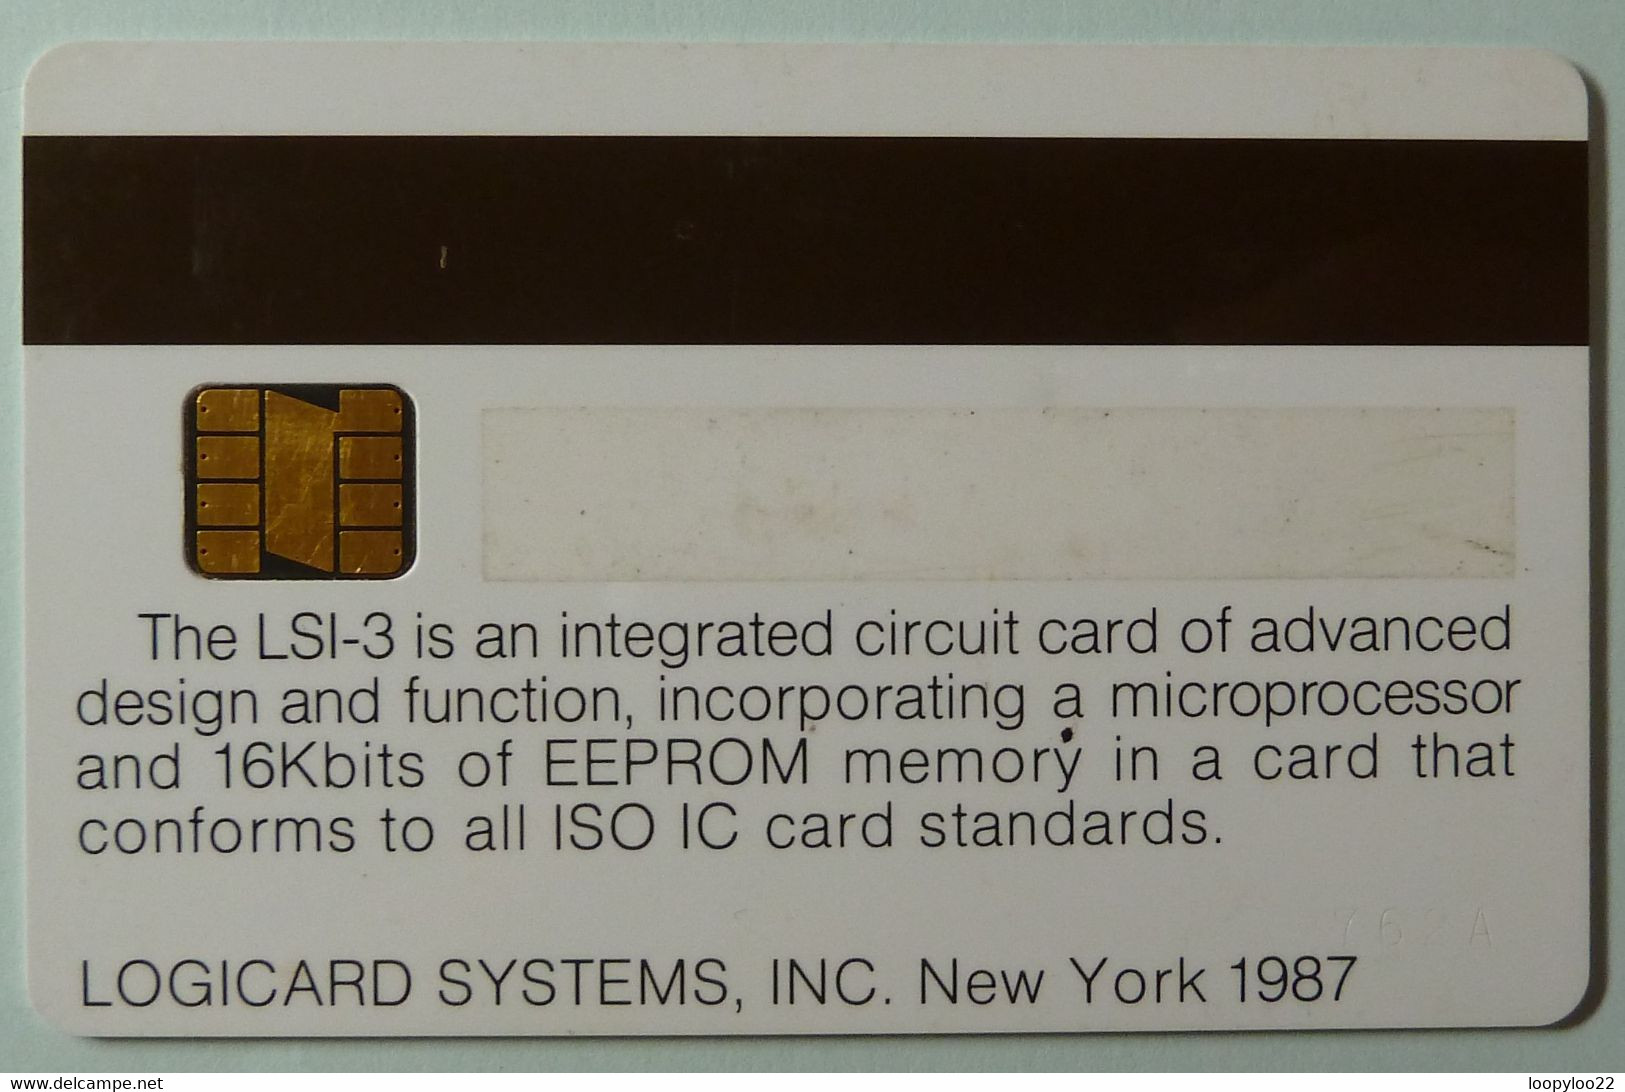 USA - Early Smart Card Demo - 1987 - LSI-3 - With Chip - RRR - [2] Chip Cards